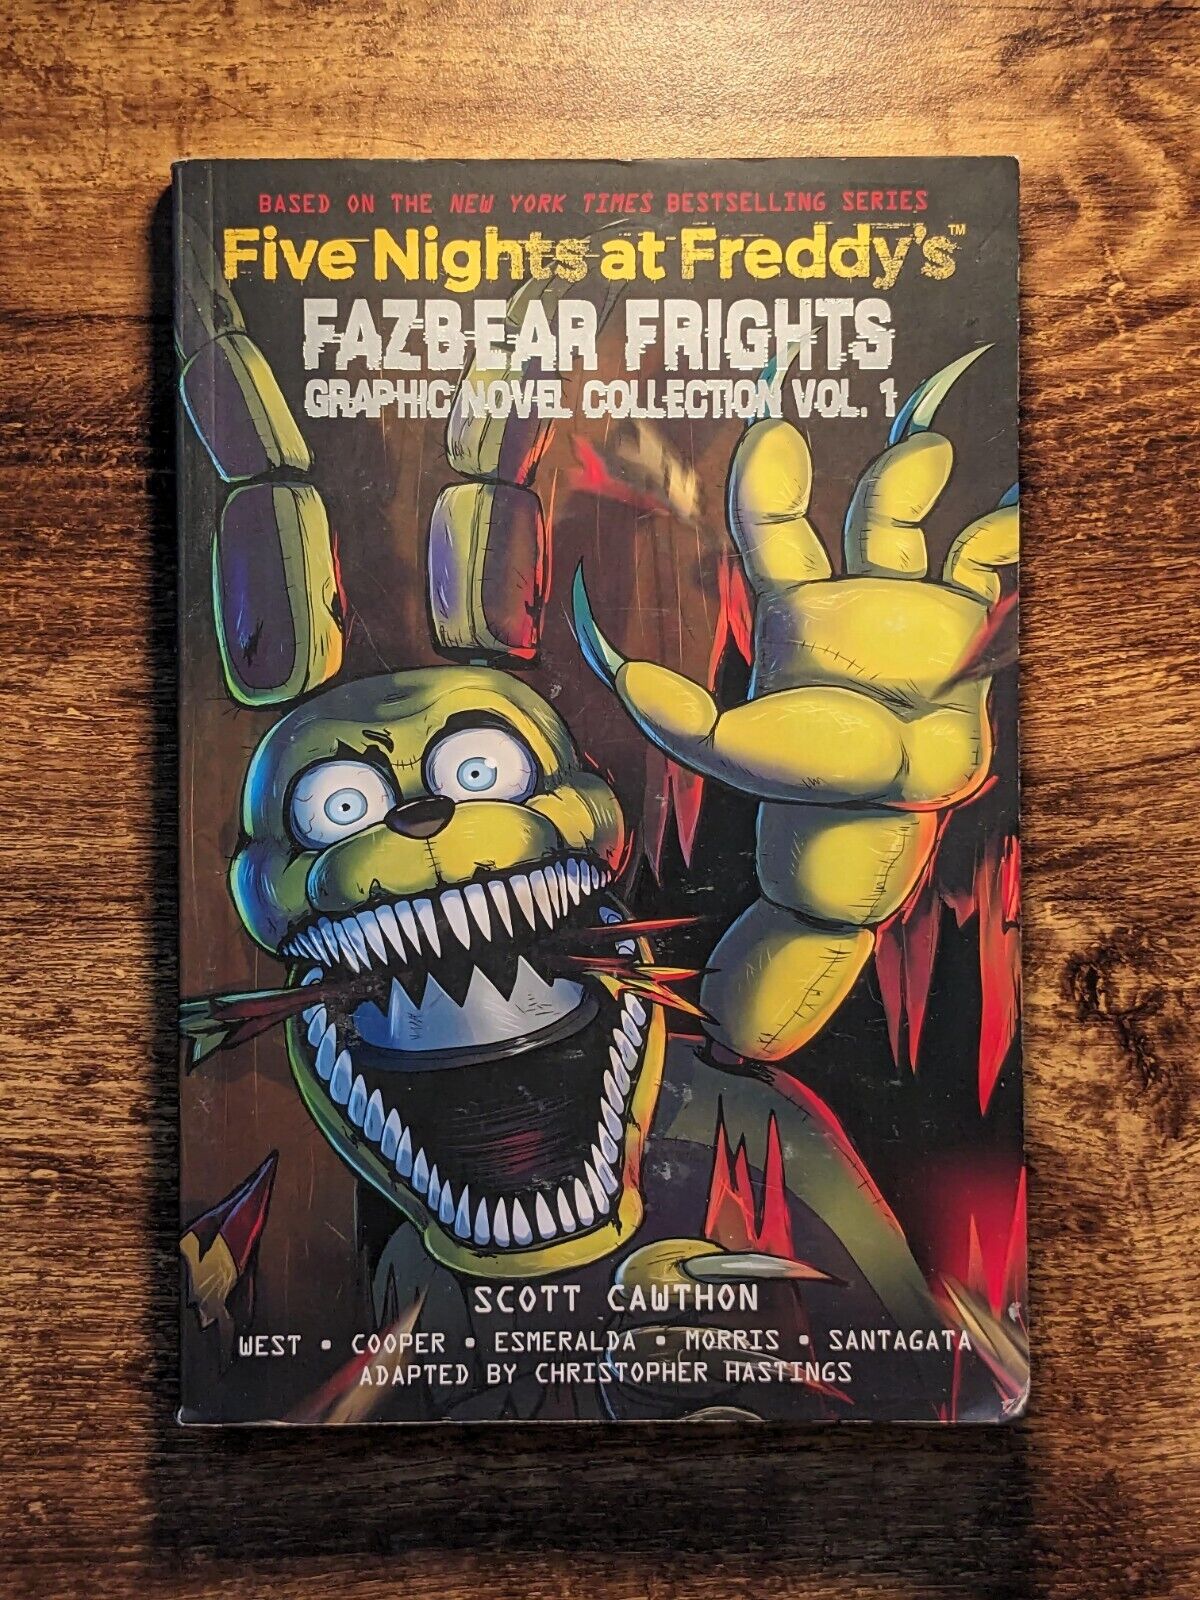 Five Nights at Freddy's: Fazbear Frights (Graphic Novel Collection Vol. 1)